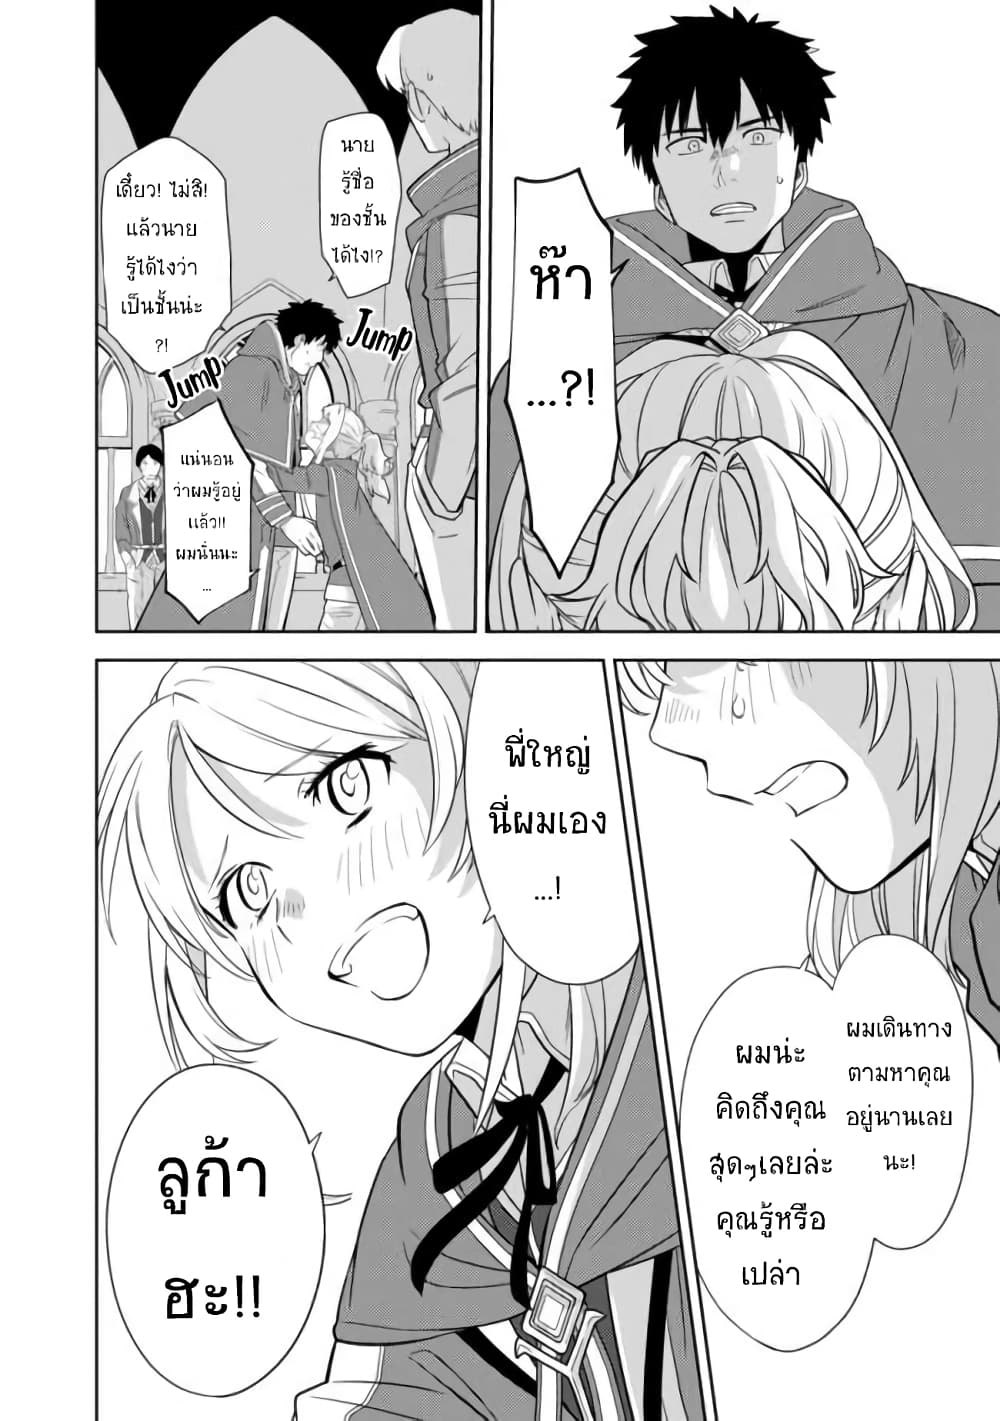 The Reincarnated Swordsman With 9999 Strength Wants to Become a Magician! ตอนที่ 1. 2 (36)